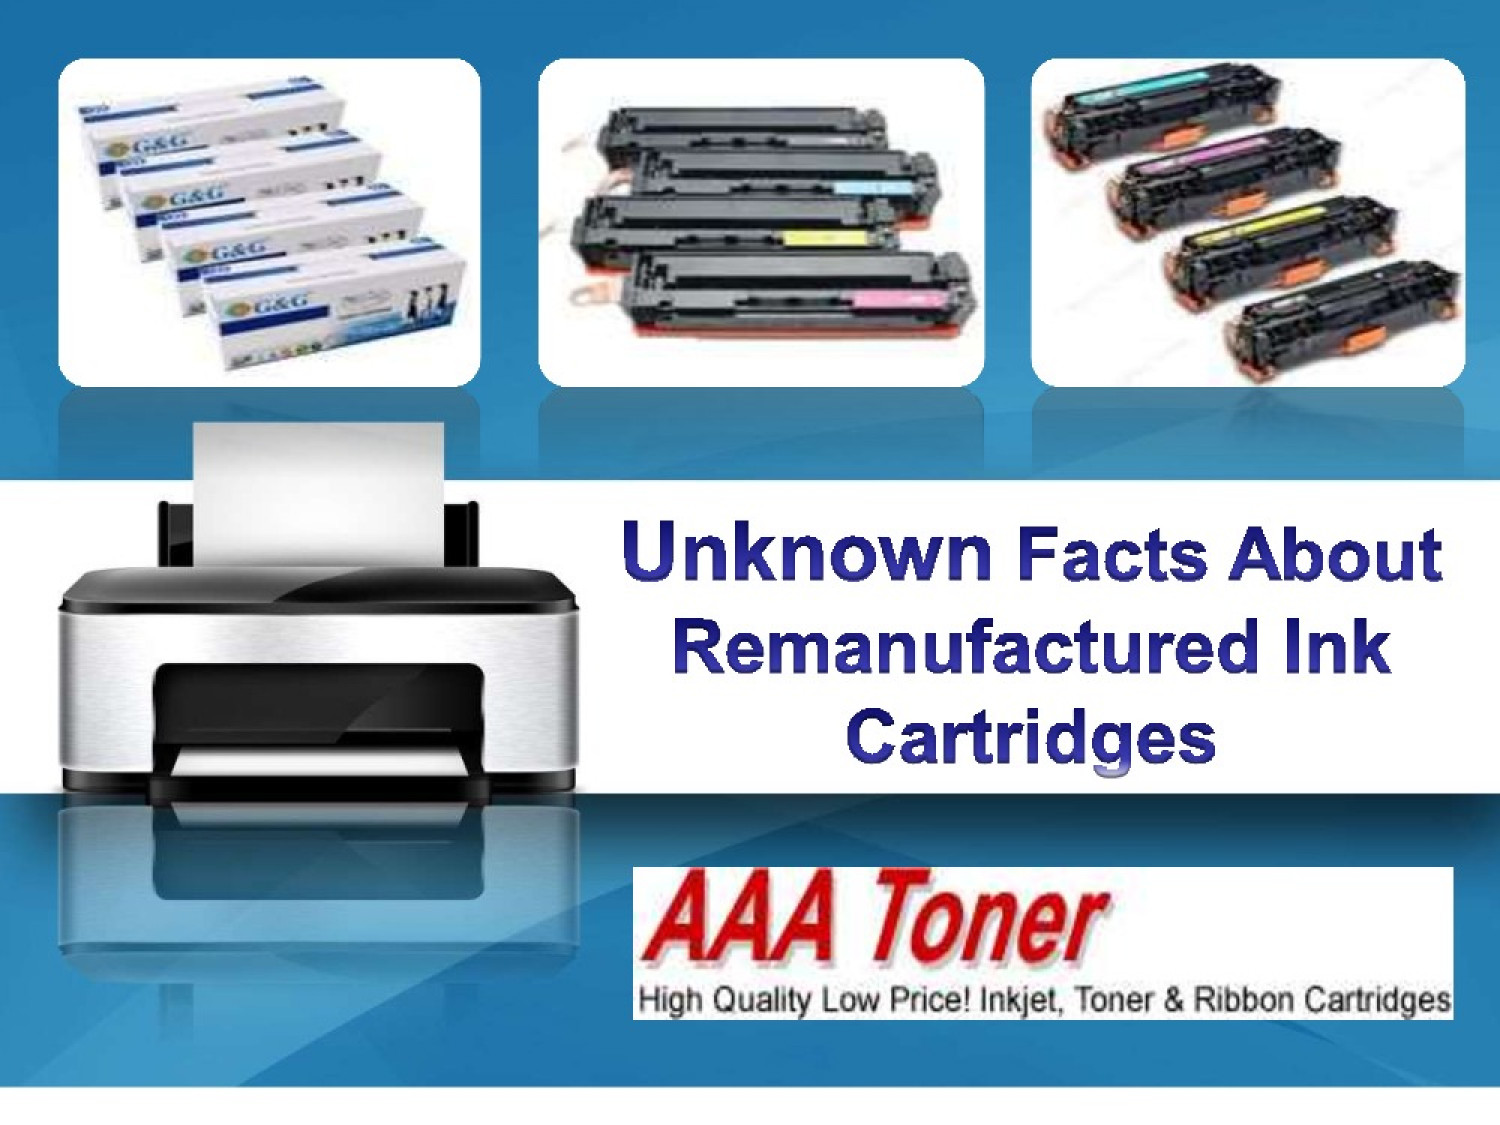 Unknown Facts About Remanufactured Ink Cartridges Infographic